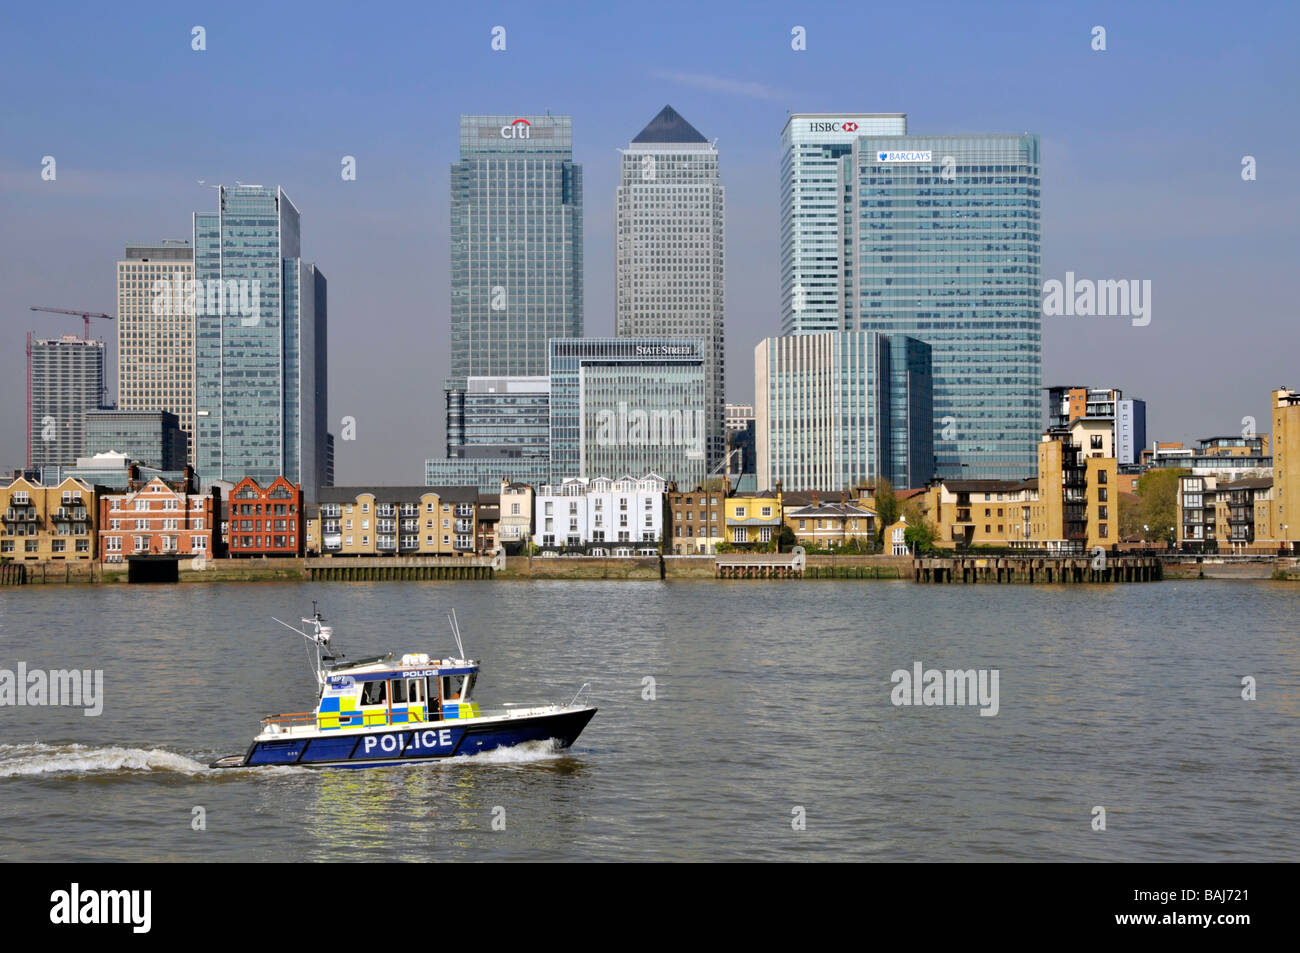 Landmark riverside business & banks offices in Canary Wharf urban development in East London Docklands beside River Thames a Met police patrol boat UK Stock Photo